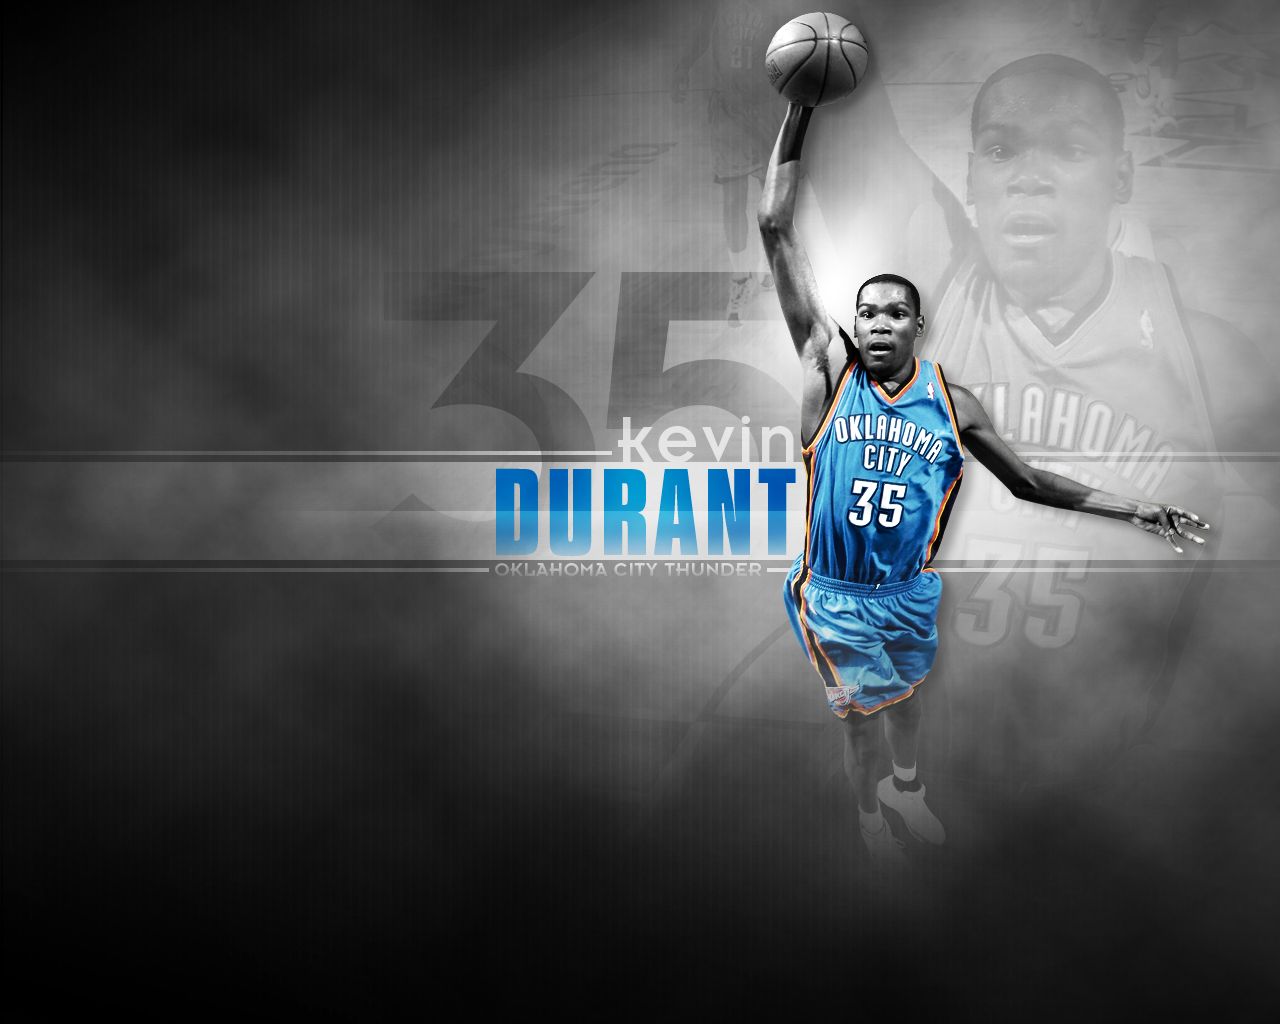 Kevin Durant Wallpaper, Kevin Durant Backgrounds, New Wallpapers